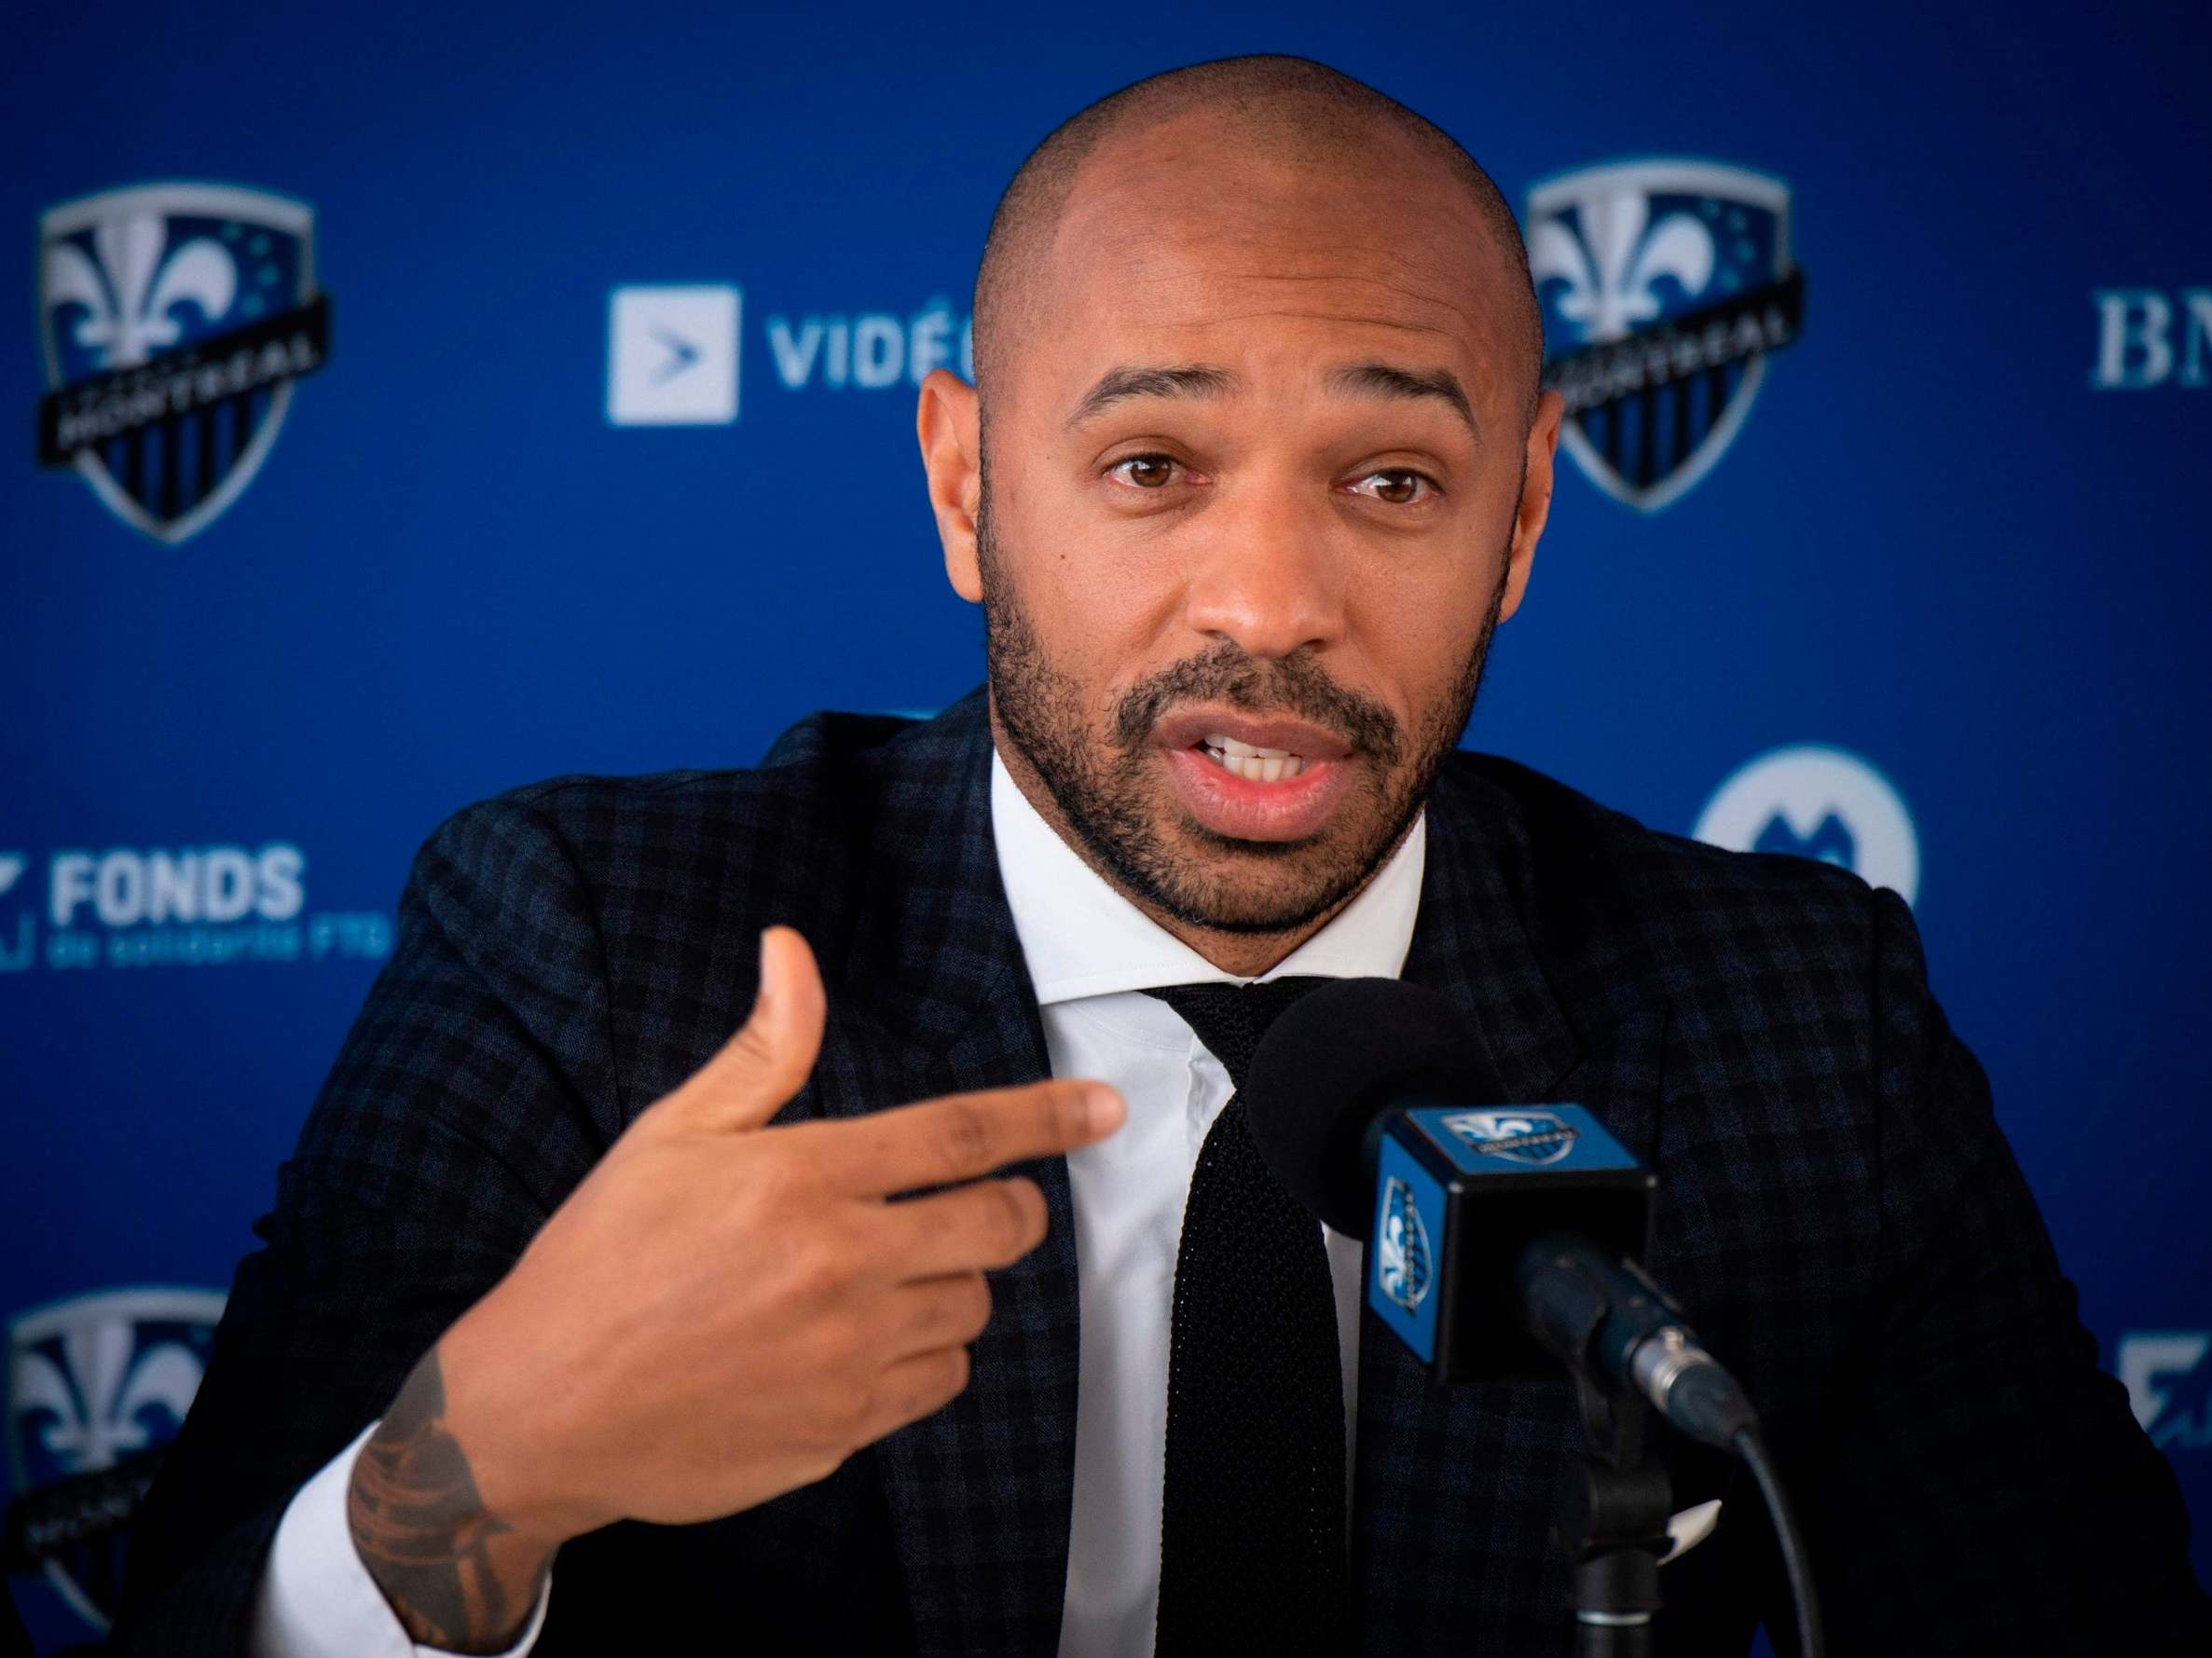 Barcelona considering Thierry Henry as option to replace Ernesto Valverde - report - Bóng Đá